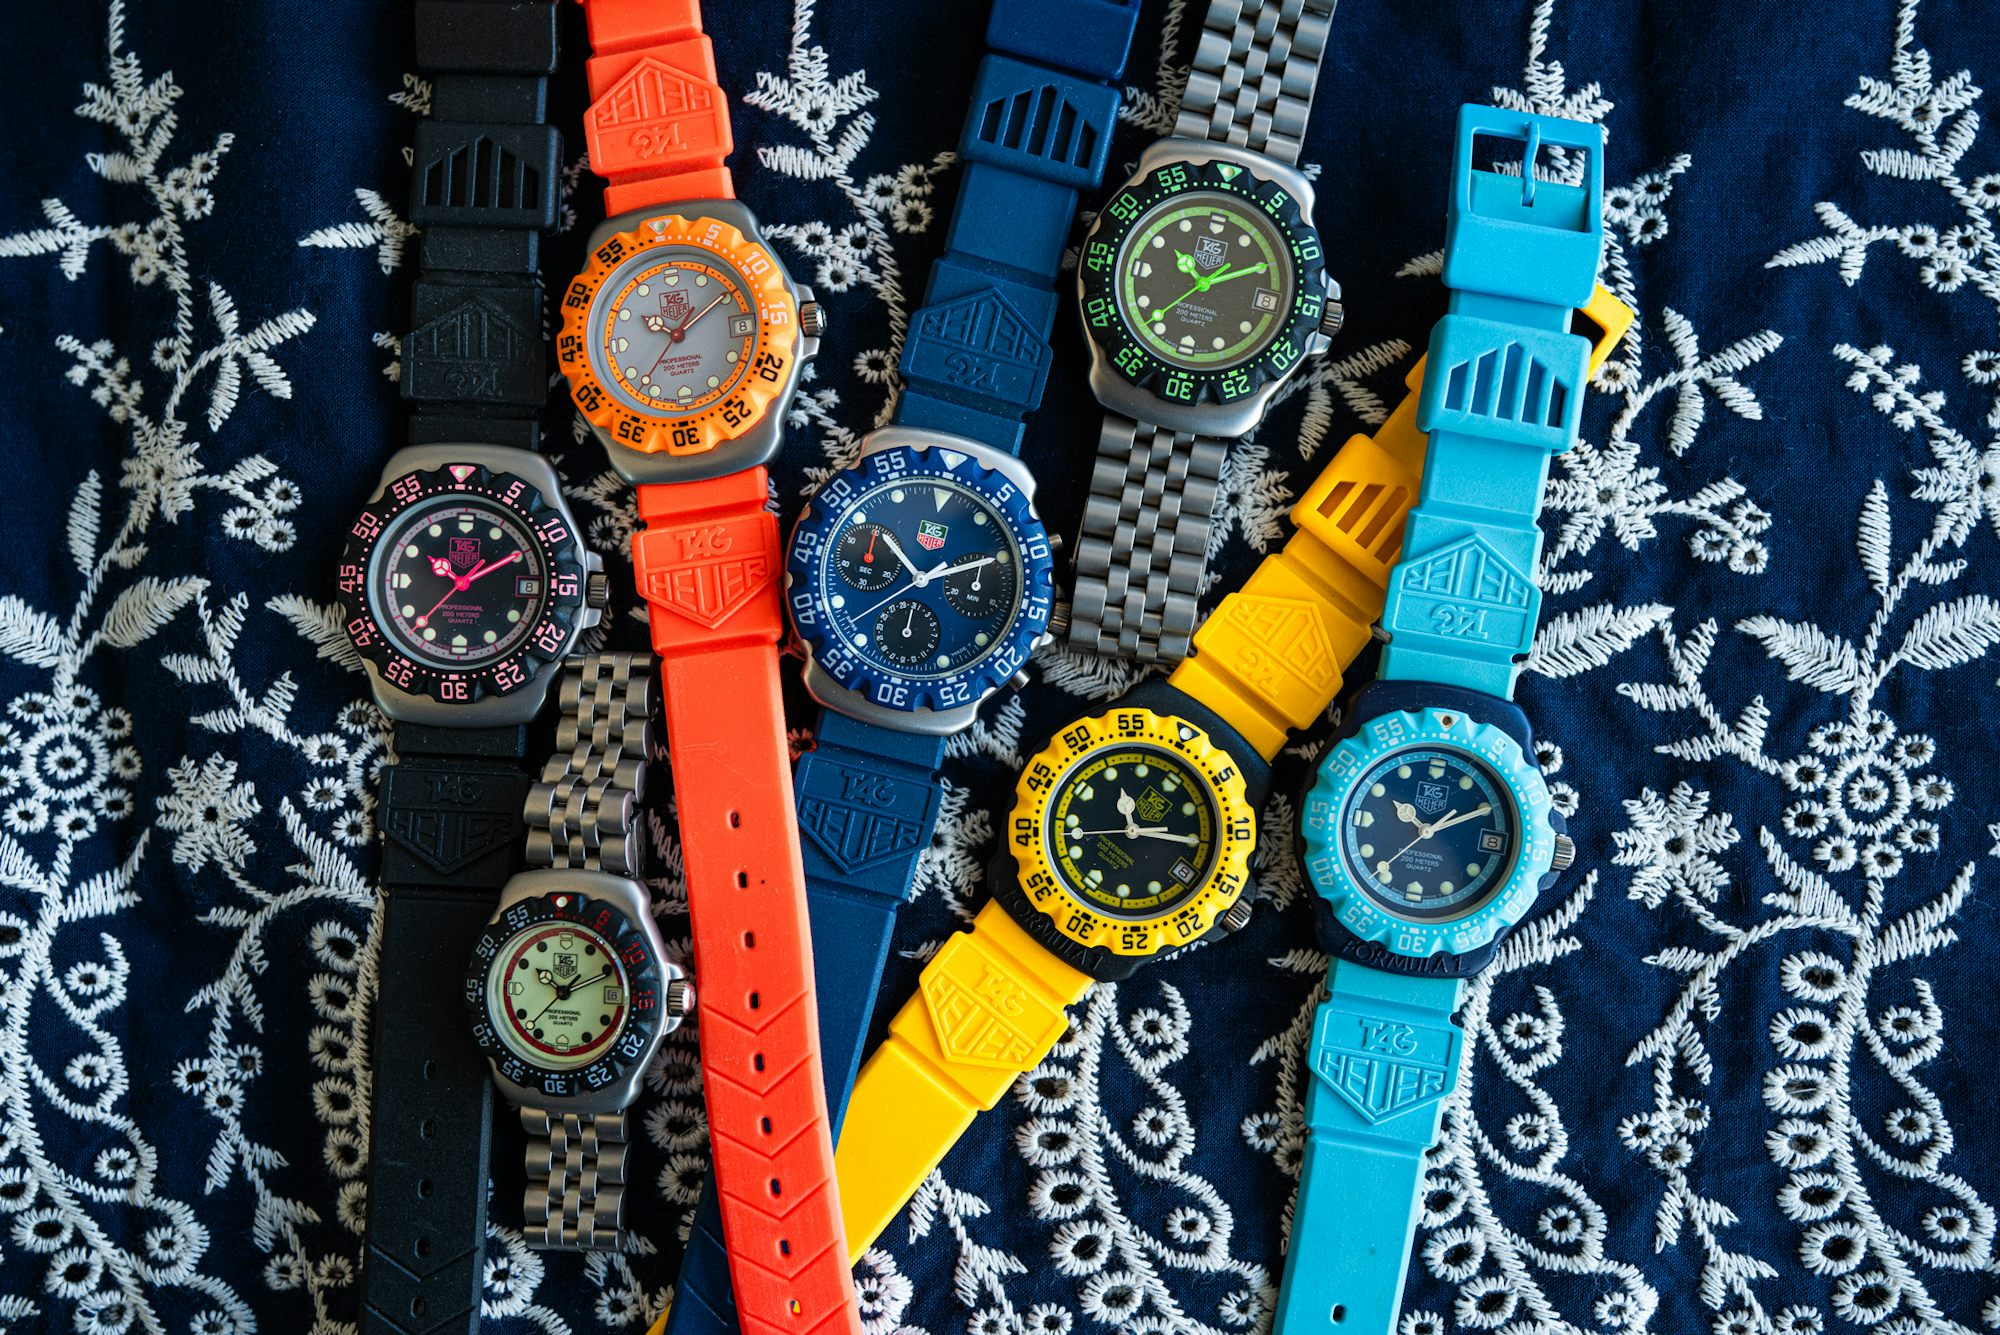 A collection of brightly colored watches laid out on embroidered fabric